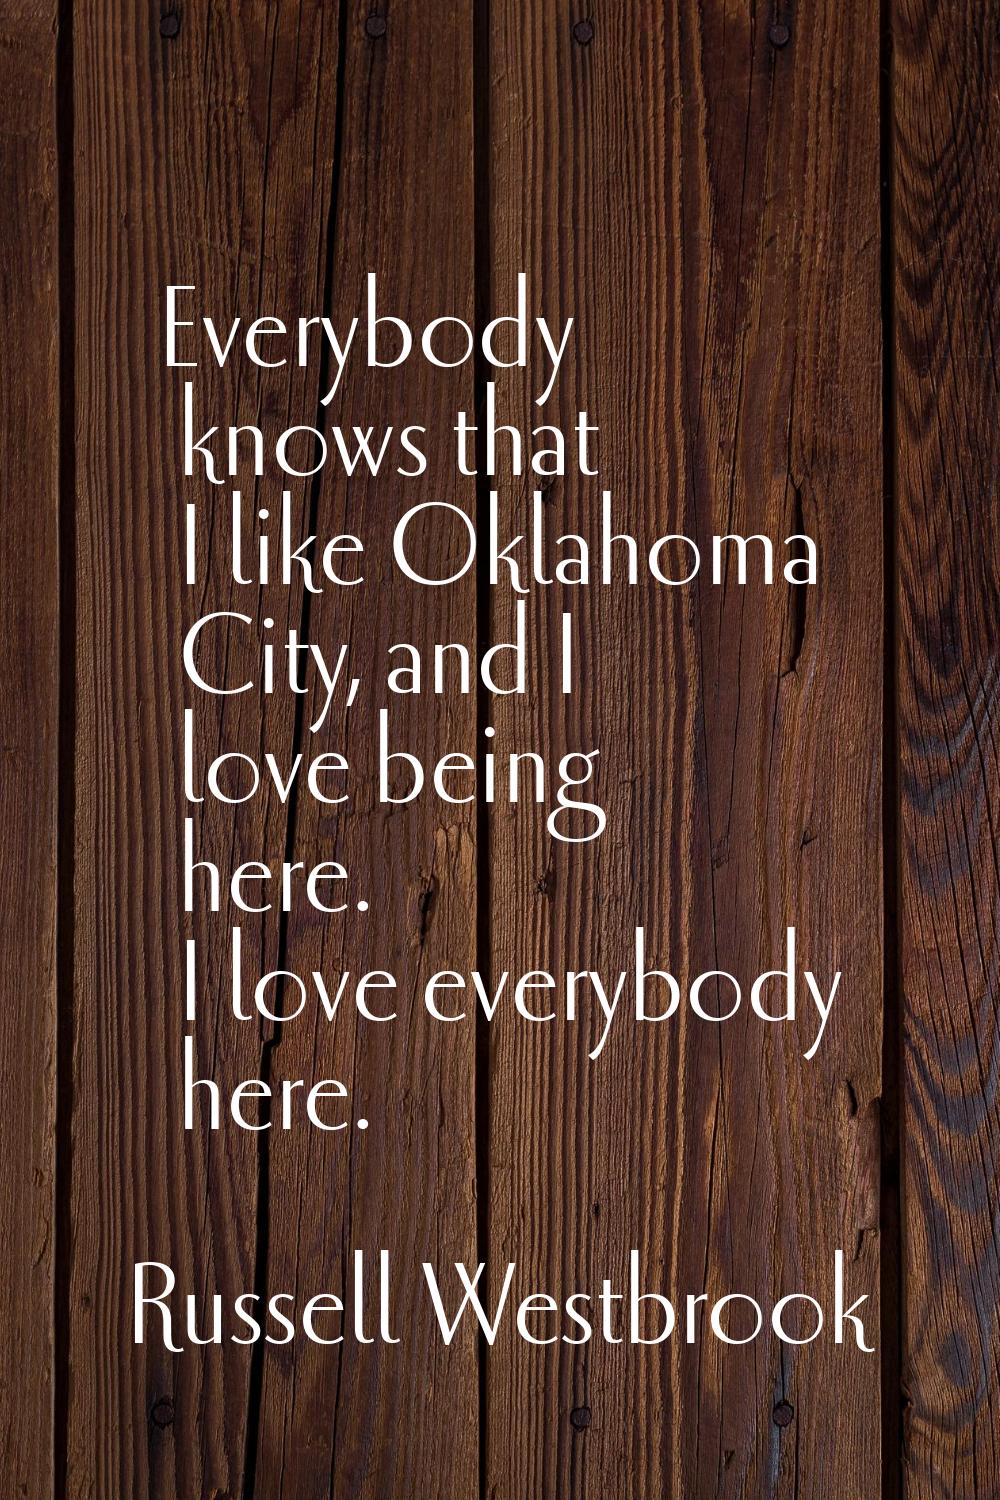 Everybody knows that I like Oklahoma City, and I love being here. I love everybody here.